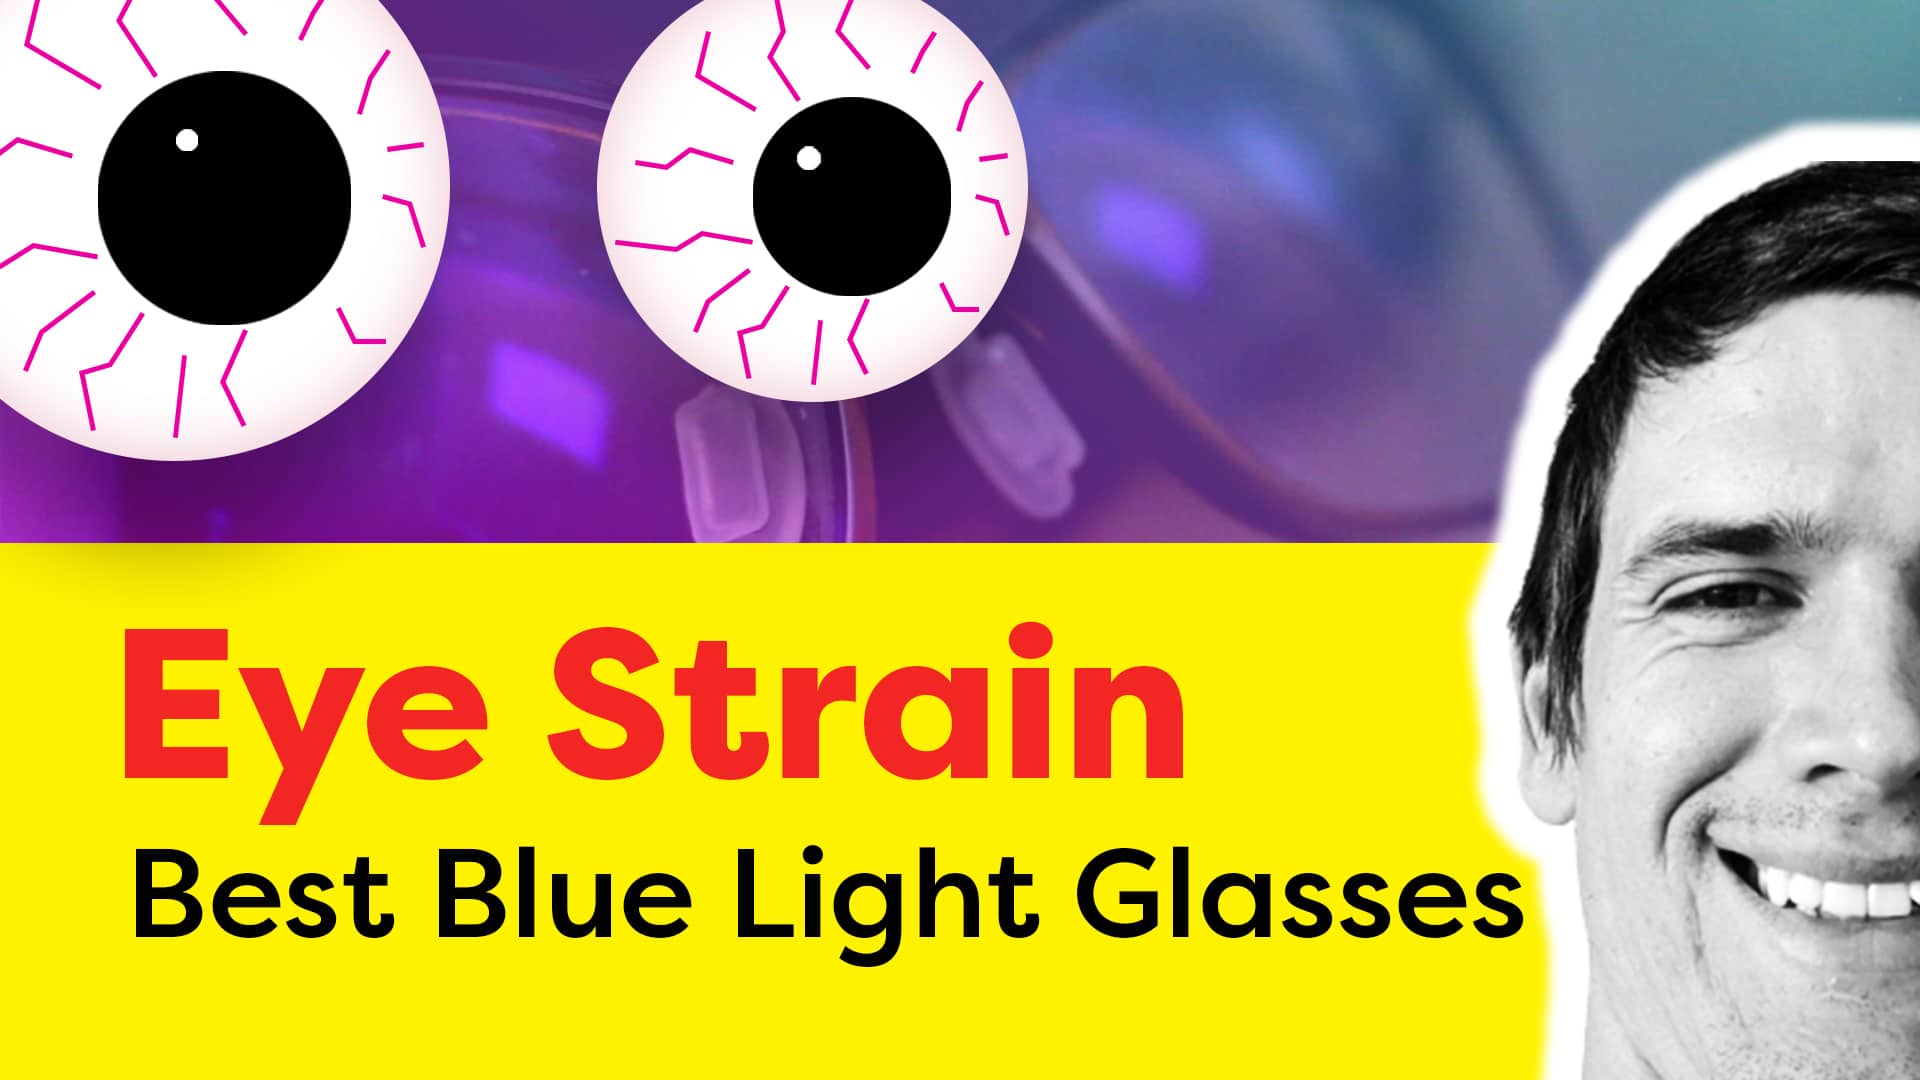 How to get rid of eye strain